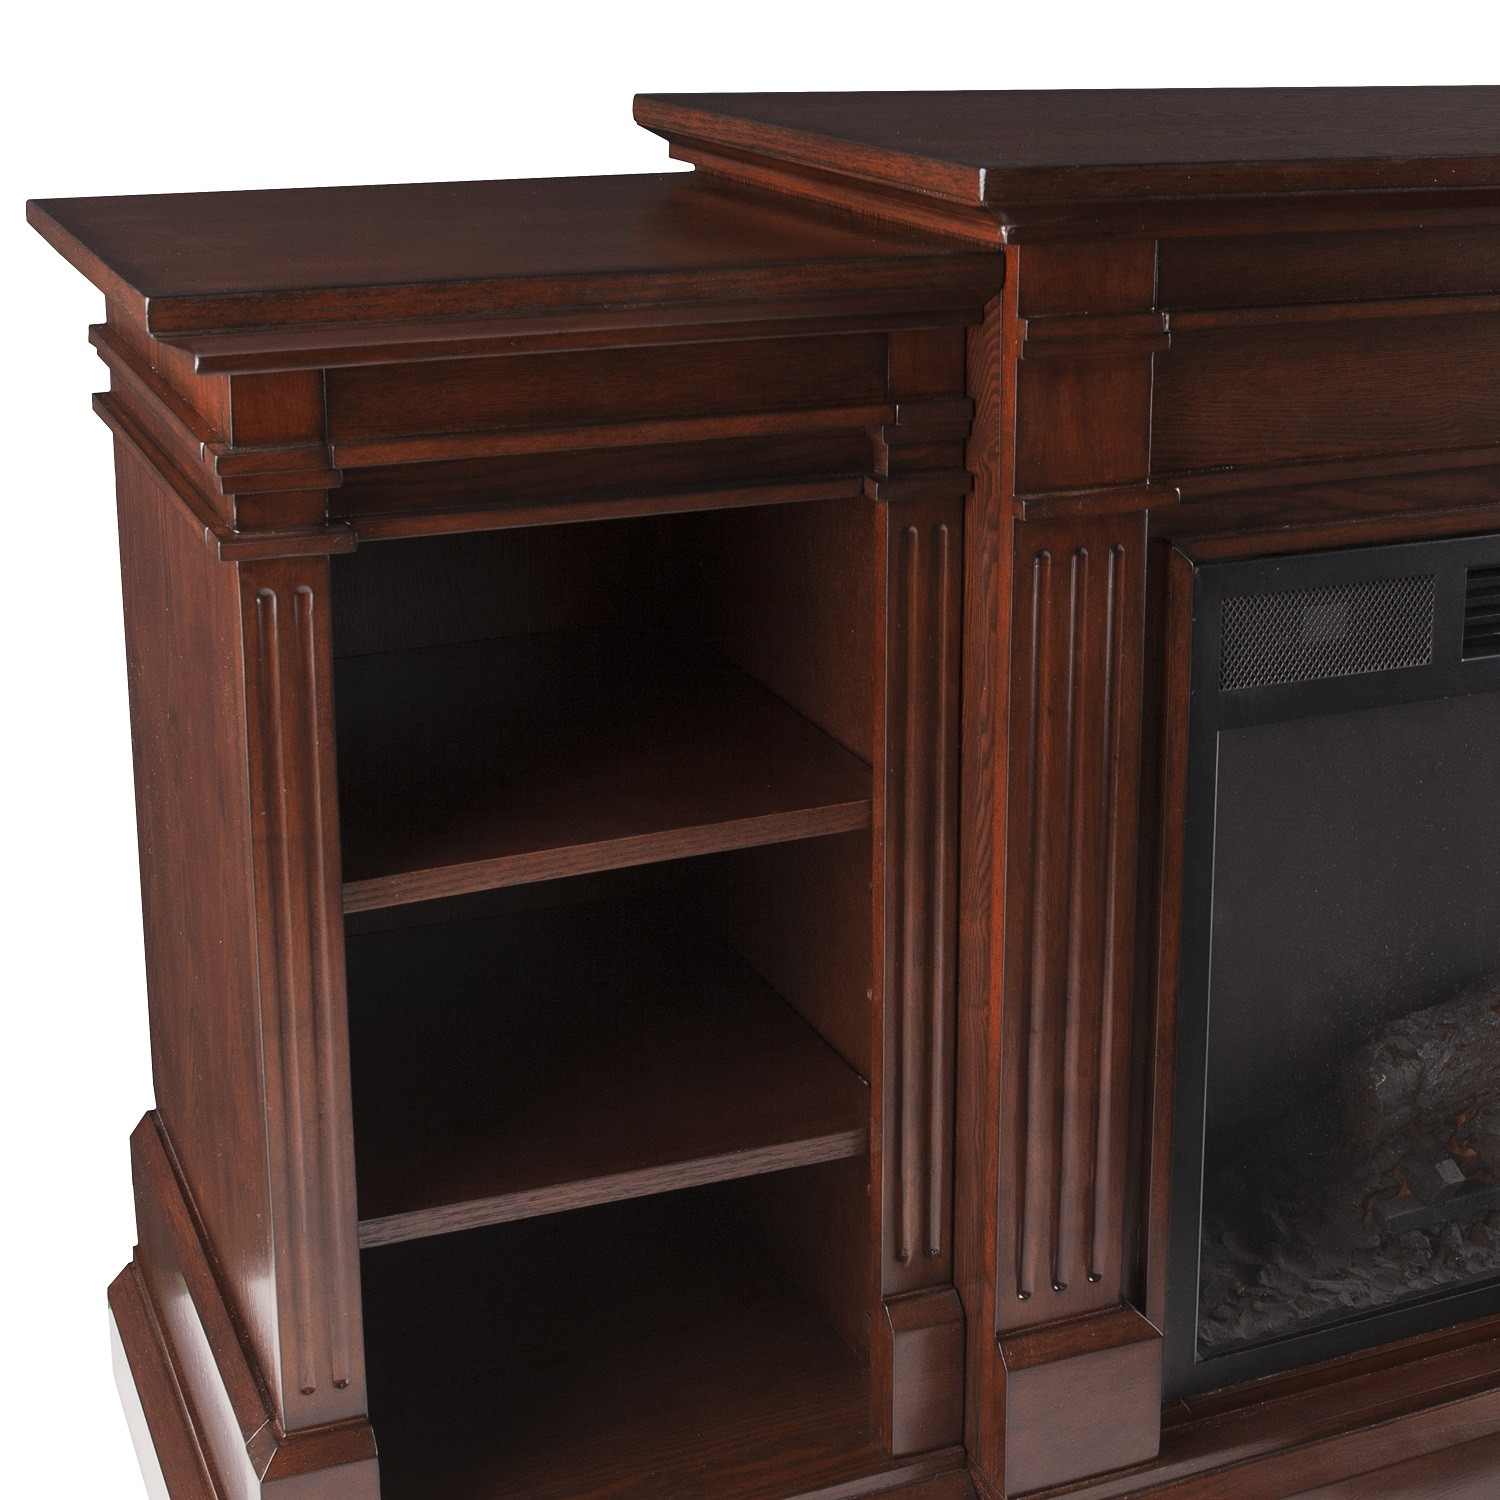 Electric Fireplace Bookcase
 72" Reese Widescreen Electric Fireplace w Bookcases